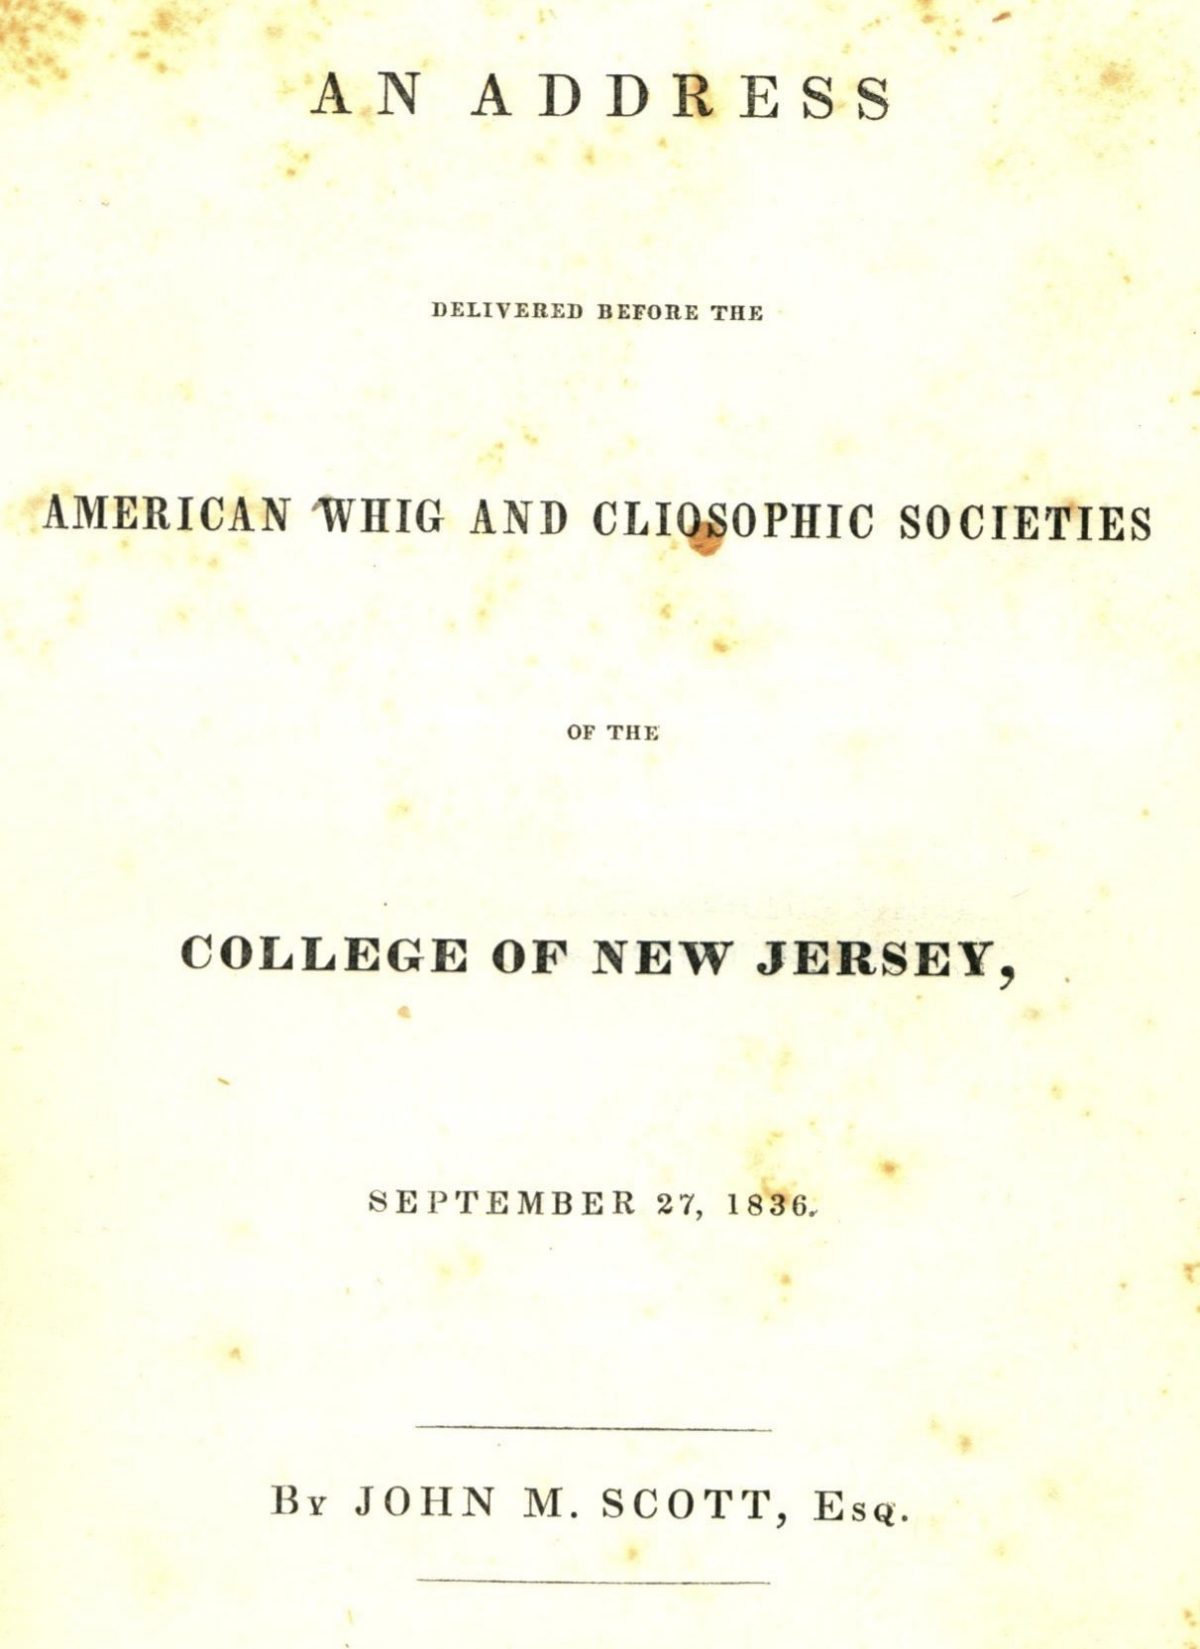 "An Address Delivered before the American Whig and Cliosophic Societies"